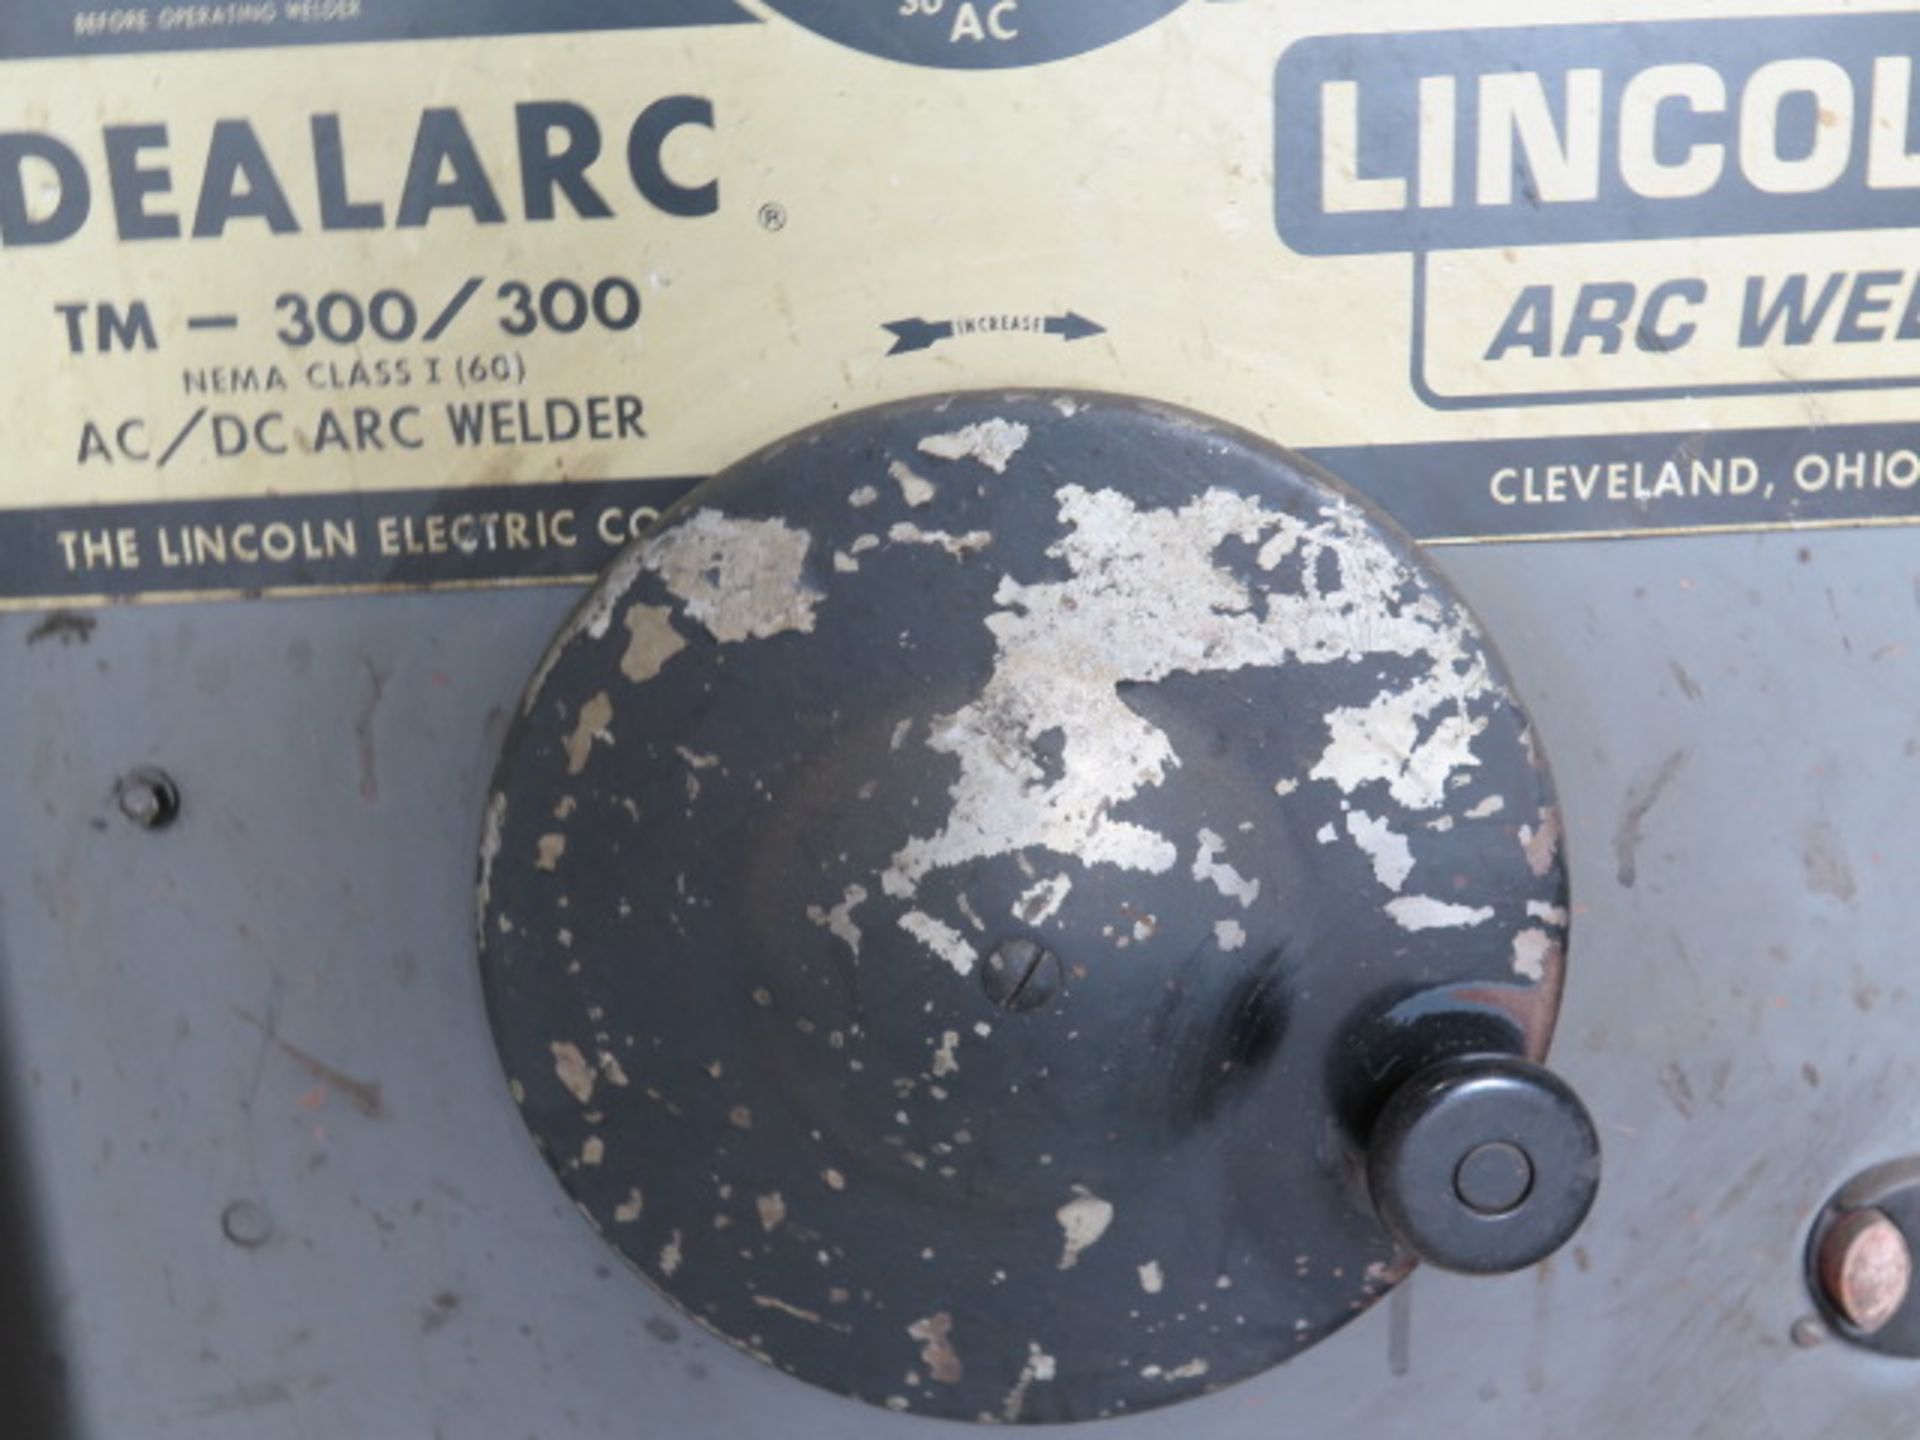 Lincoln Idealarc TM=300/300 AC/DC Arc Welding Power Source (SOLD AS-IS - NO WARRANTY) - Image 7 of 9